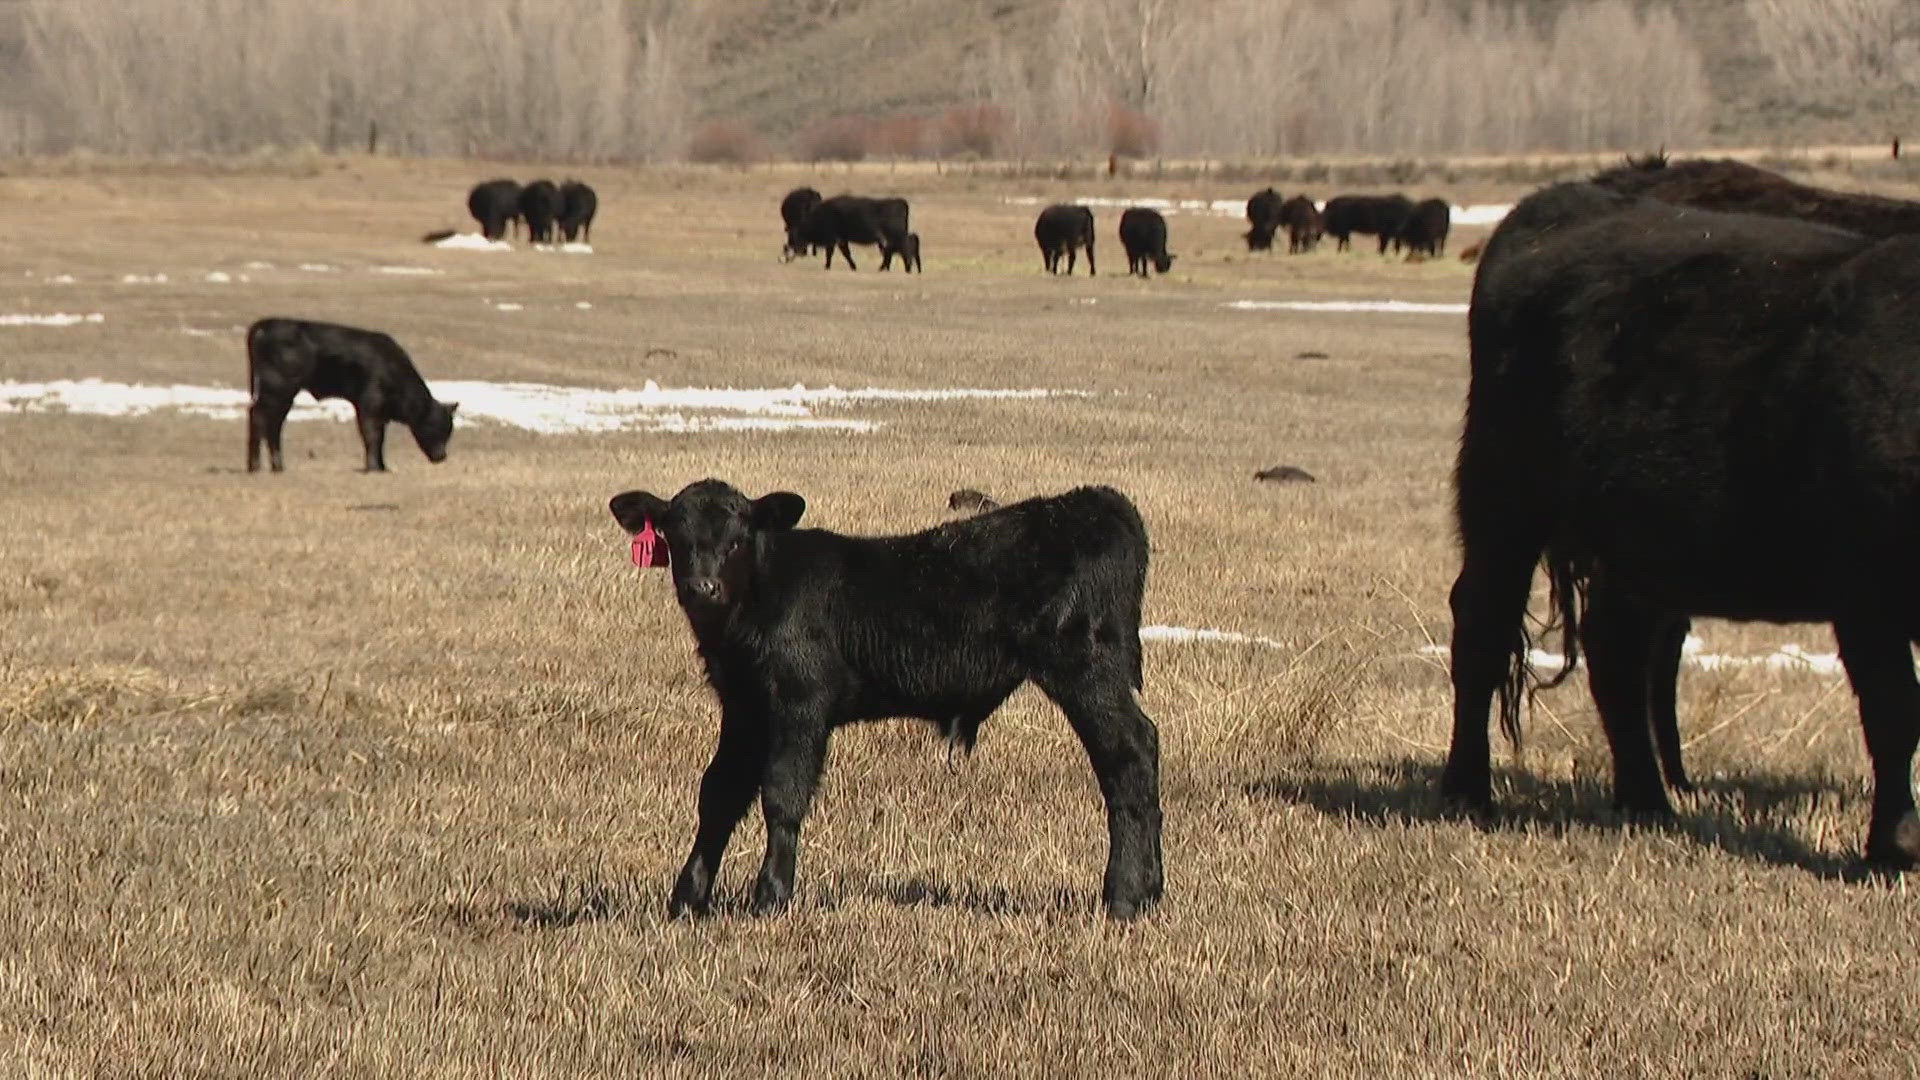 The move comes after eight cattle were killed by wolves in Jackson and Grand counties in one month - including five cattle from the same ranch in Grand County.